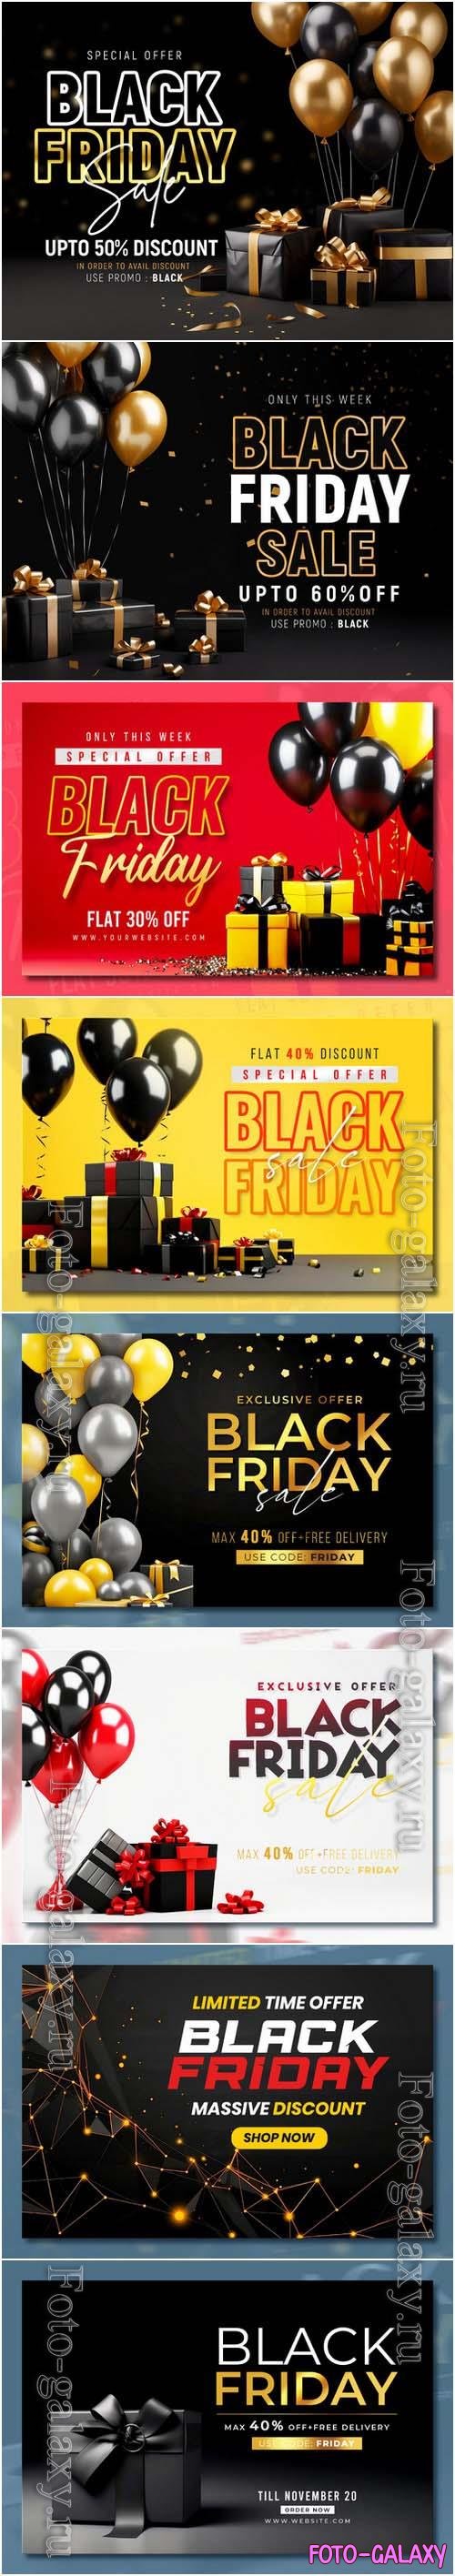 Black friday sale banner with realistic 3d gifts and balloons in psd vol 1